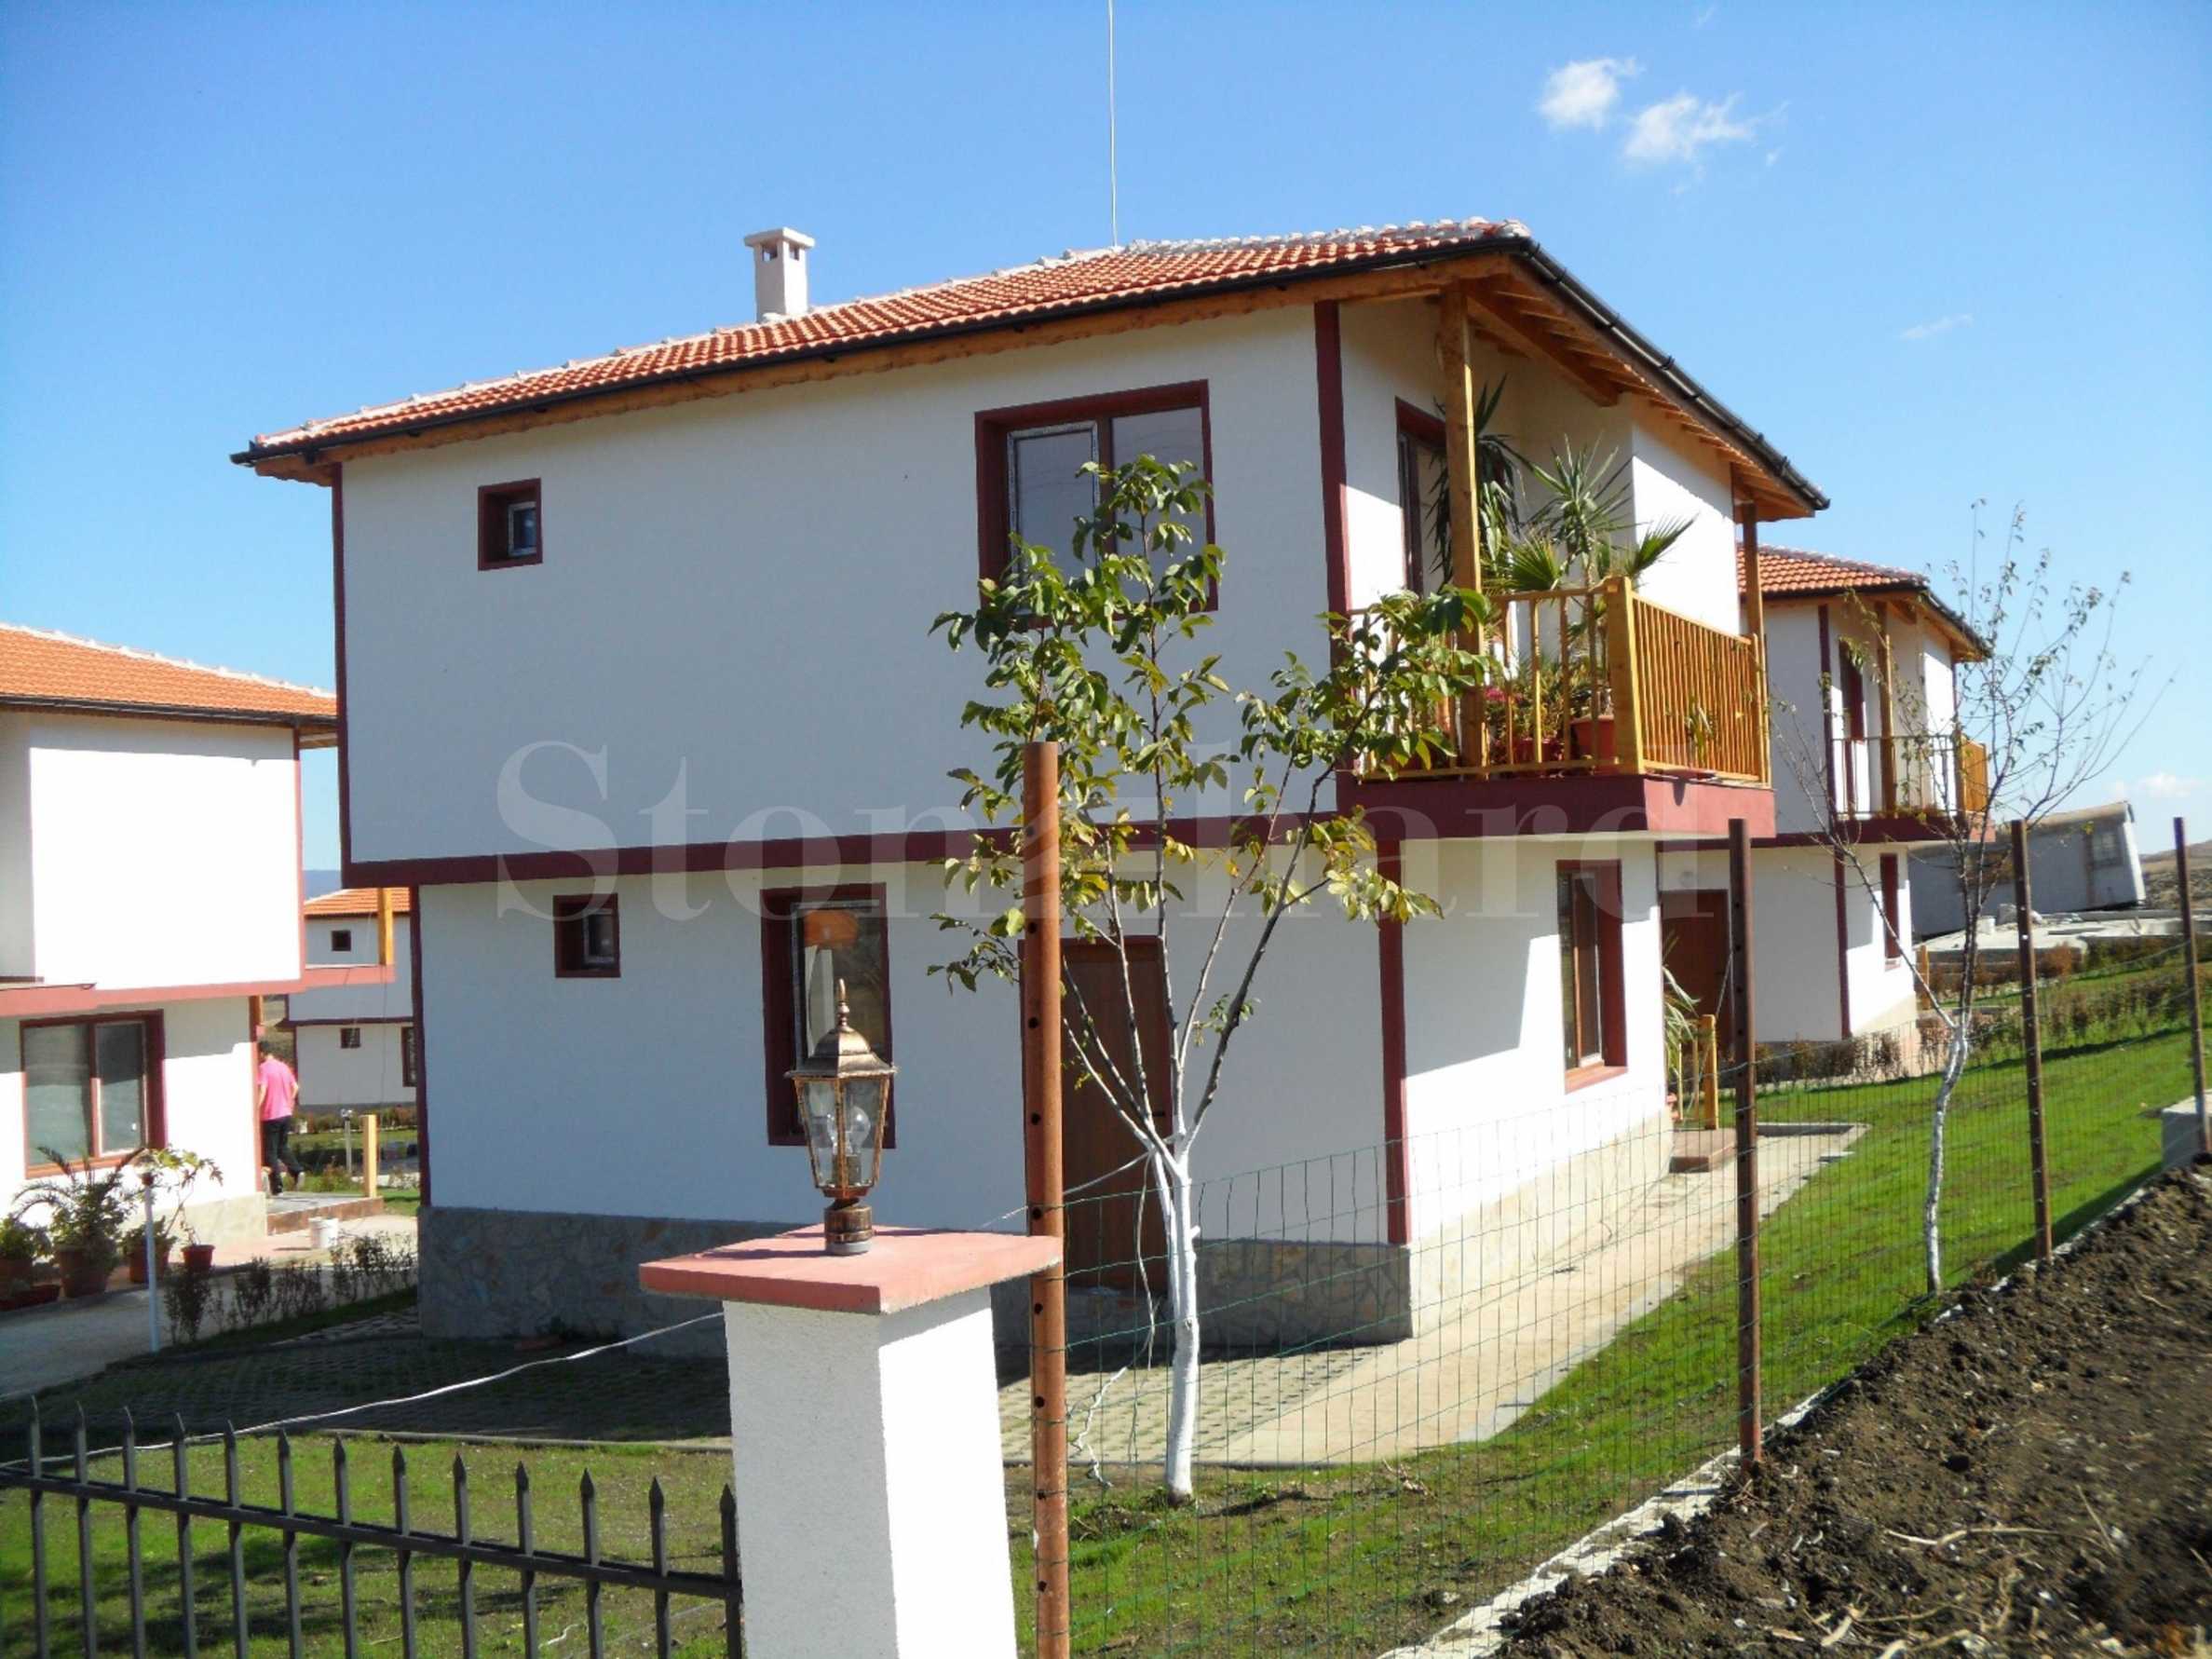 Newly built residential complex in Alexandrovo1 - Stonehard